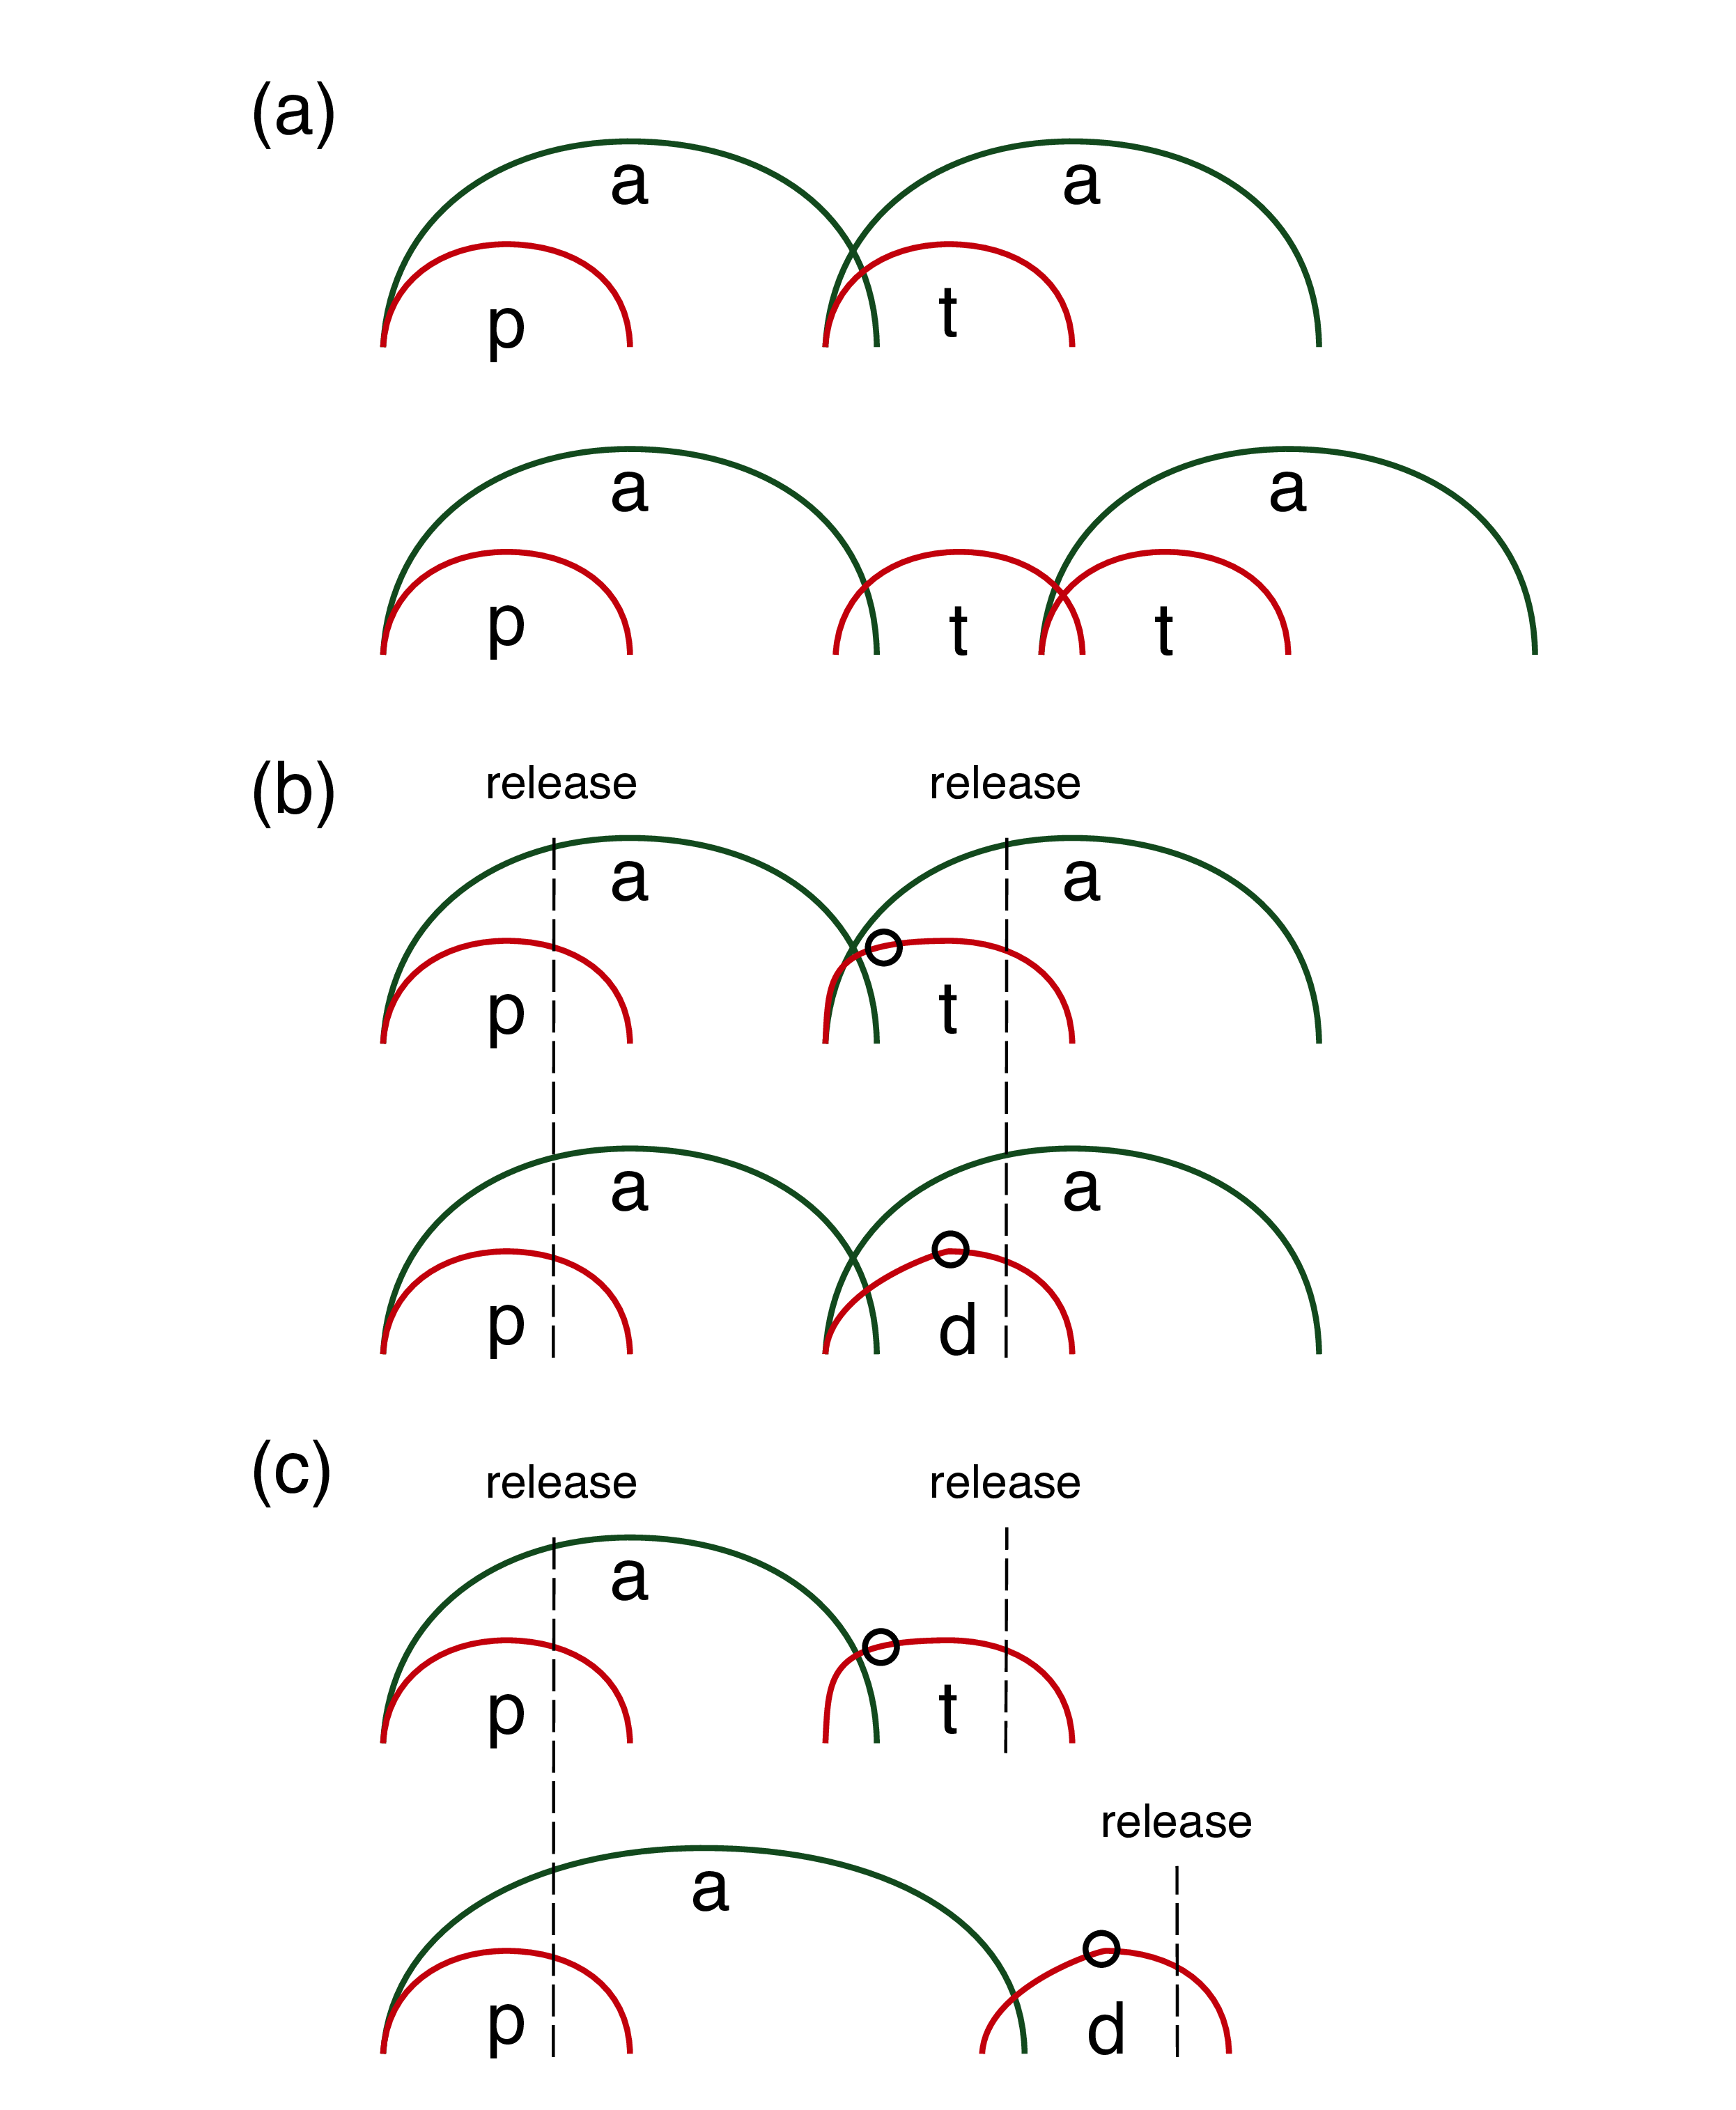 Schematics of the gestural phasing of vocalic and consonantal gestures in different contexts, which partially repeats fig:vv-cent-2 from p:en-relrel. The *x*-axis is time, while the *y*-axis can be interpreted as oral aperture for vowels and oral constriction for consonants. (a) shows singleton vs geminate stops, (b) voiceless and voiced stops in disyllabic words, and (c) voiceless and voiced stops in monosyllabic words. Note that in (a) the distance between the vowels increases in the geminate context, while it is stable in (b) and (c). The circles in (b) on the consonant gesture lines indicate the time of acoustic closure onset.